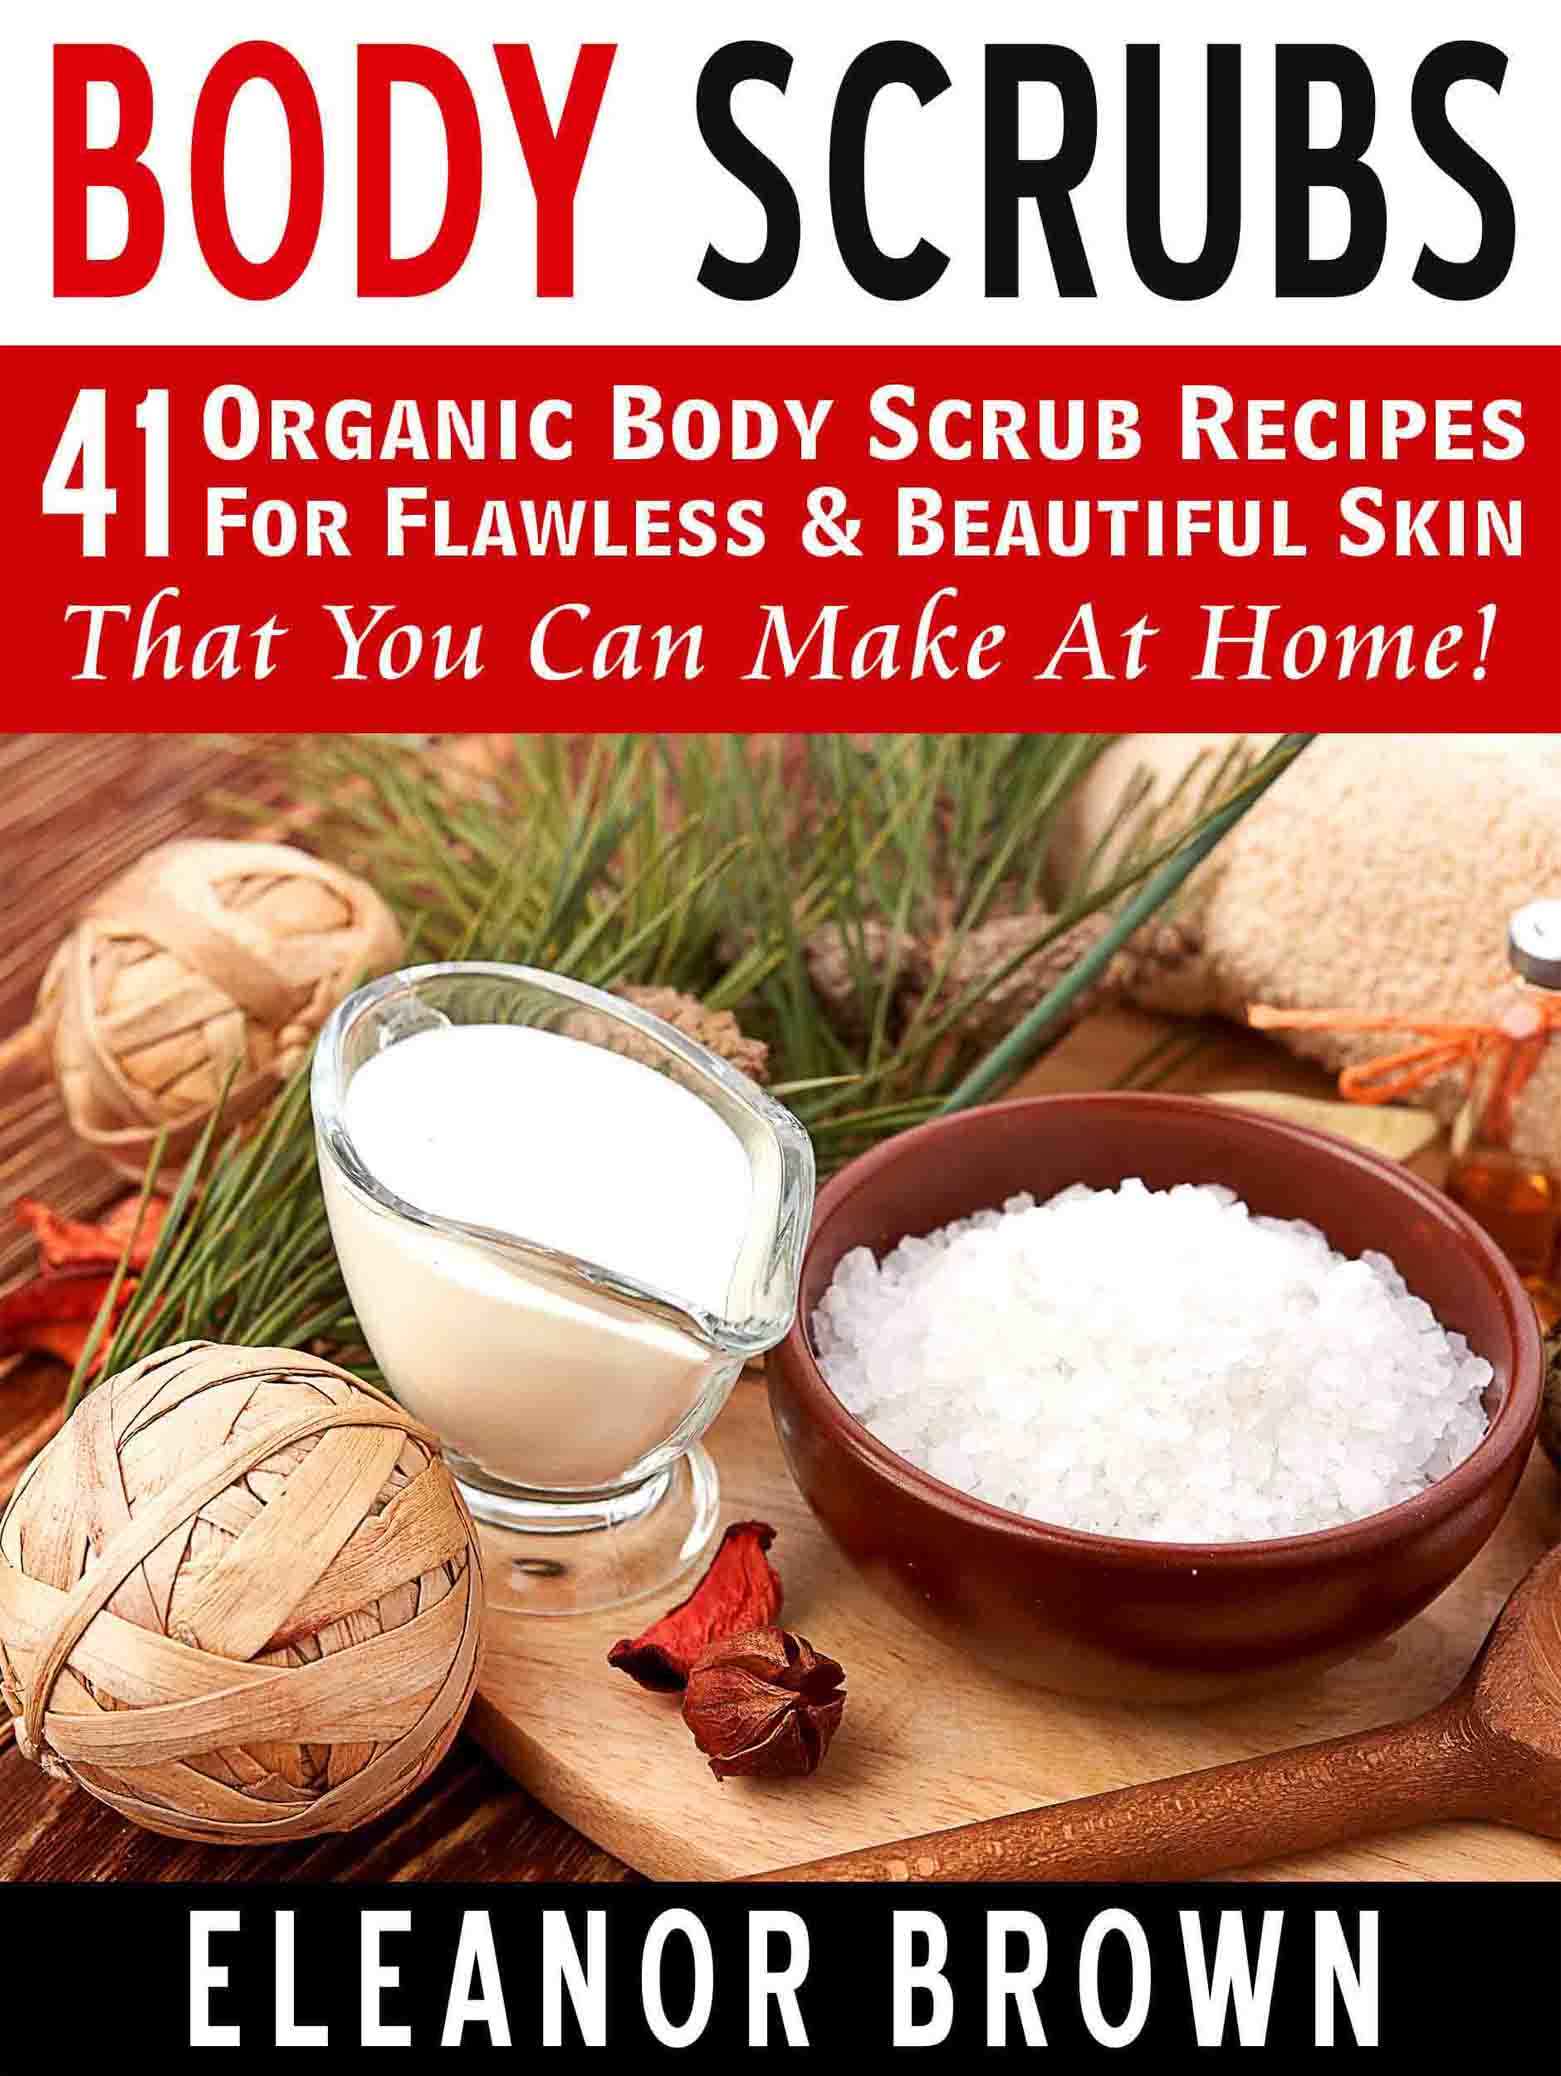 FREE: Body Scrubs: 41 Organic Body Scrub Recipes For Flawless & Beautiful Skin That You Can Make At Home! by Eleanor Brown